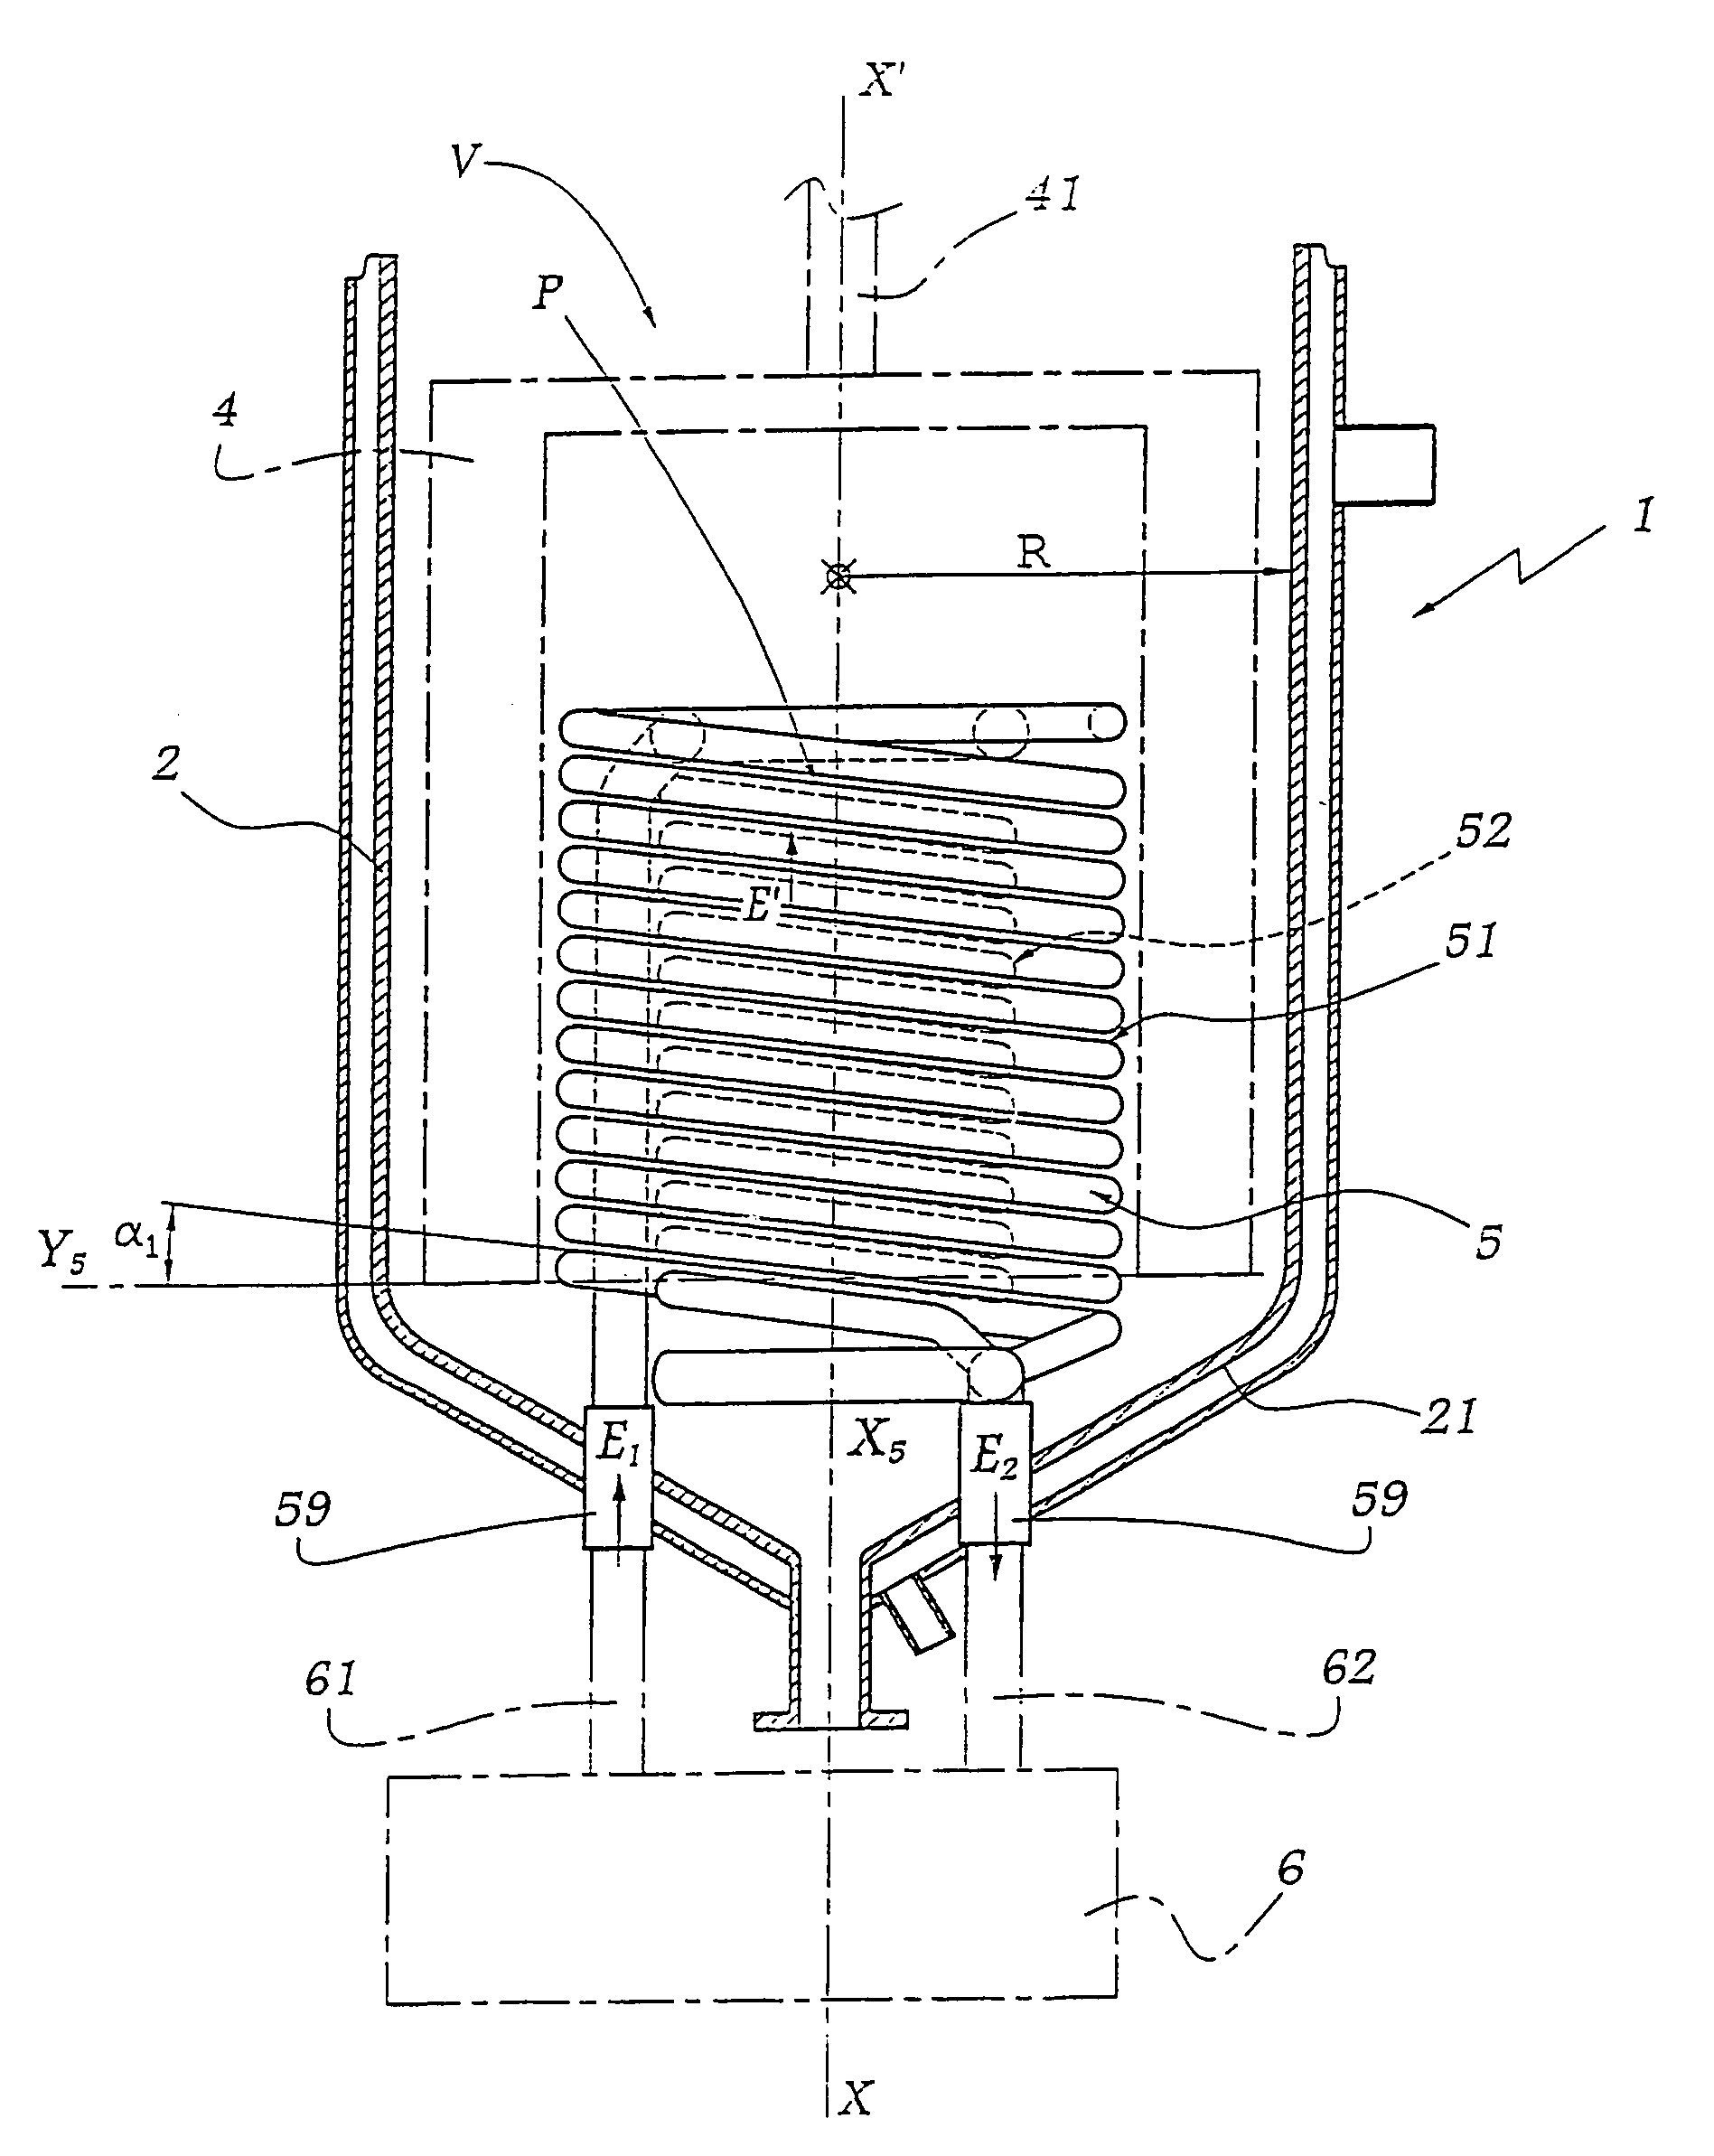 Coil for coolant circulation, method for making same and reactor comprising same